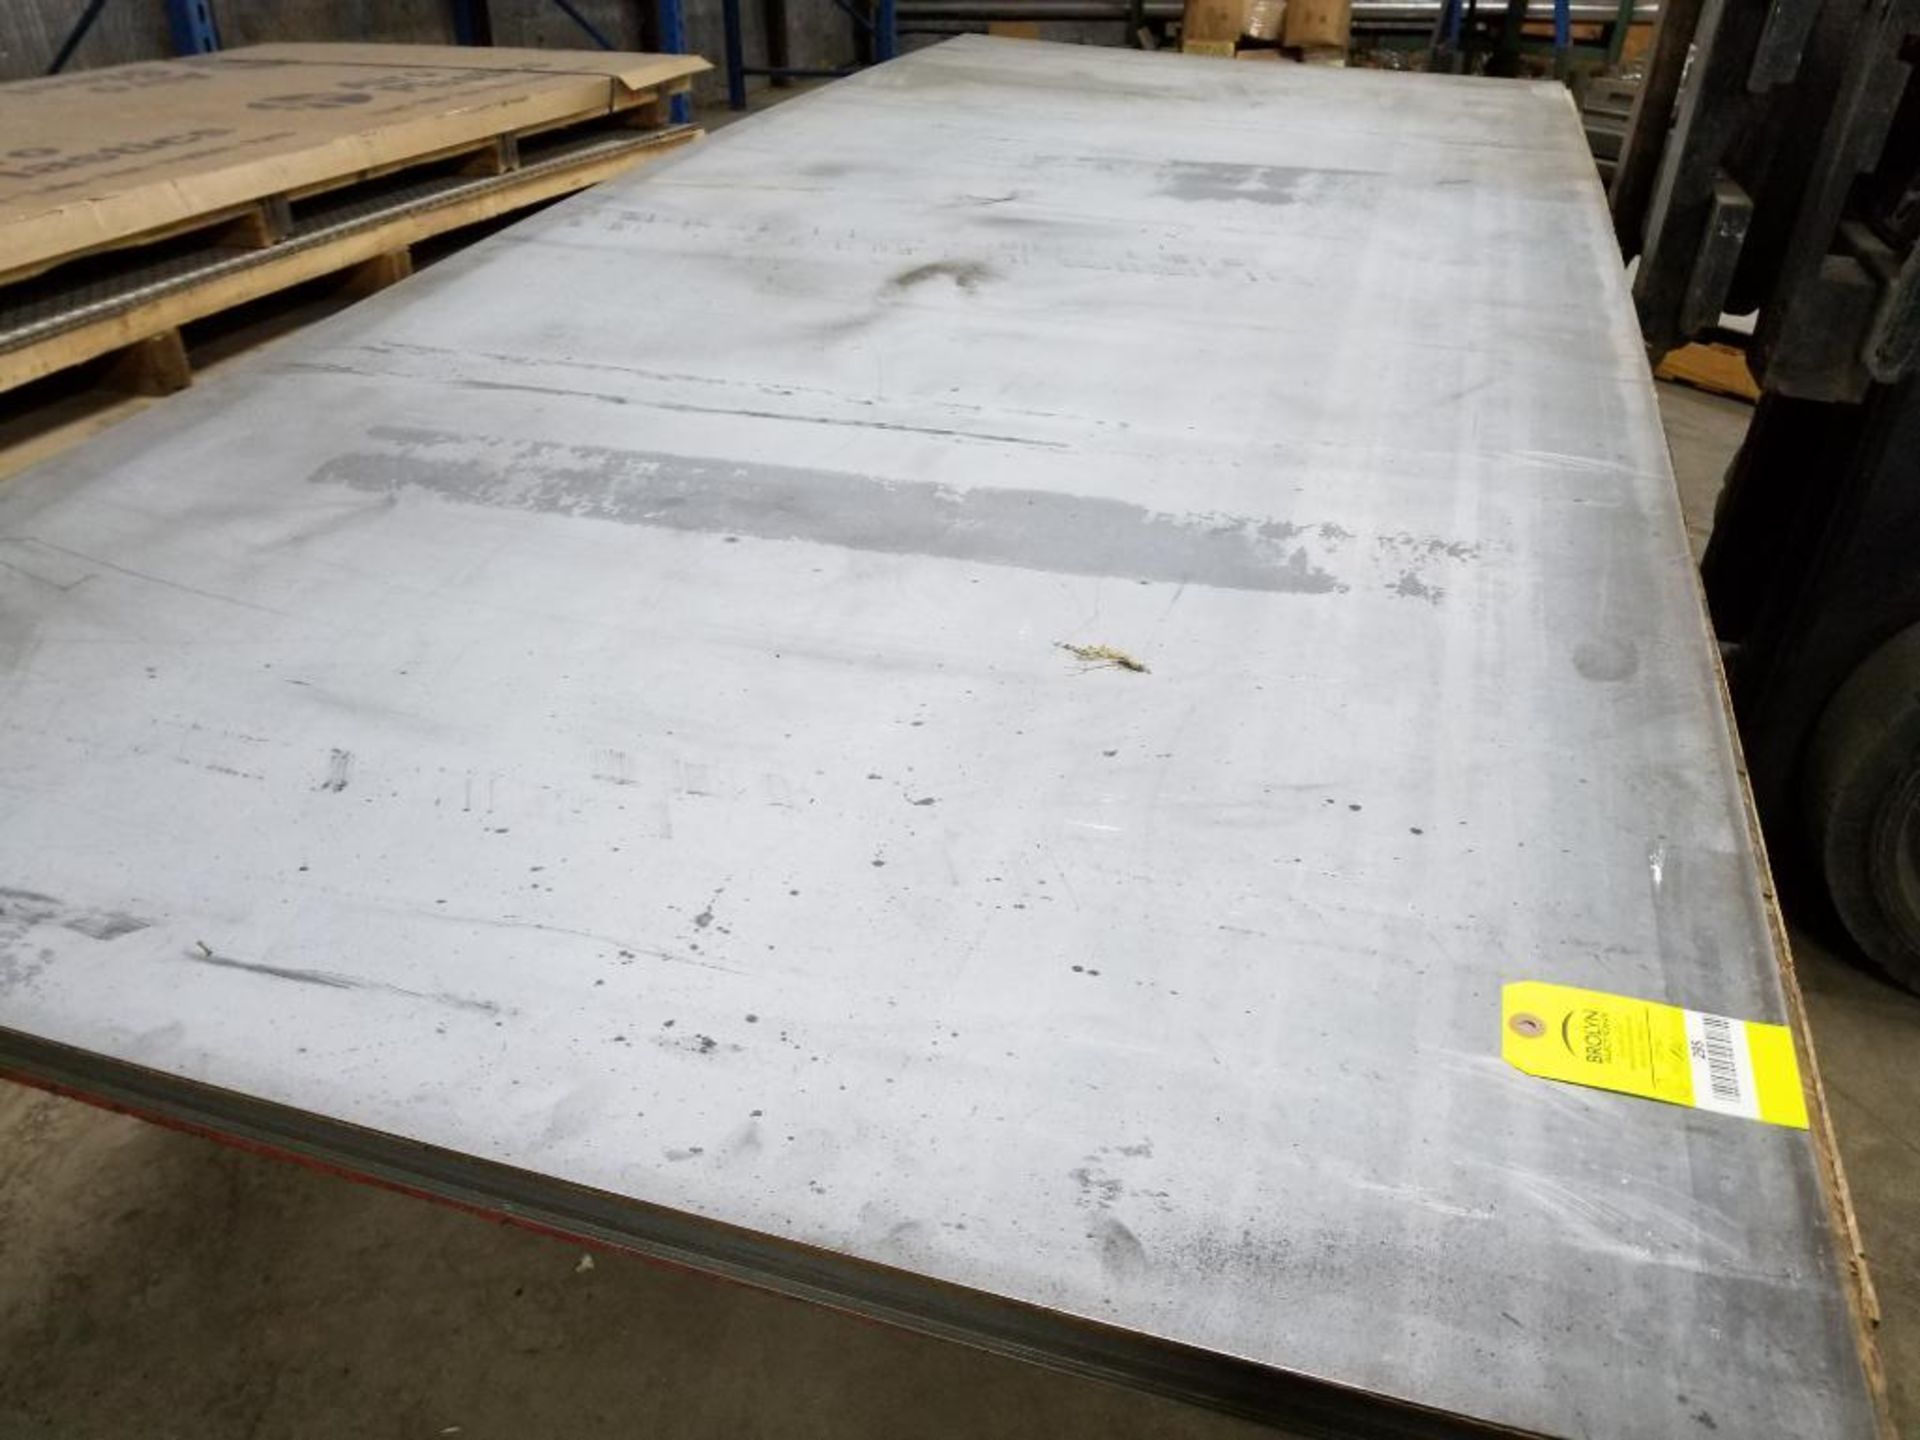 Qty 16 - Galvanized steel sheets 48in x 120in. - Image 5 of 6